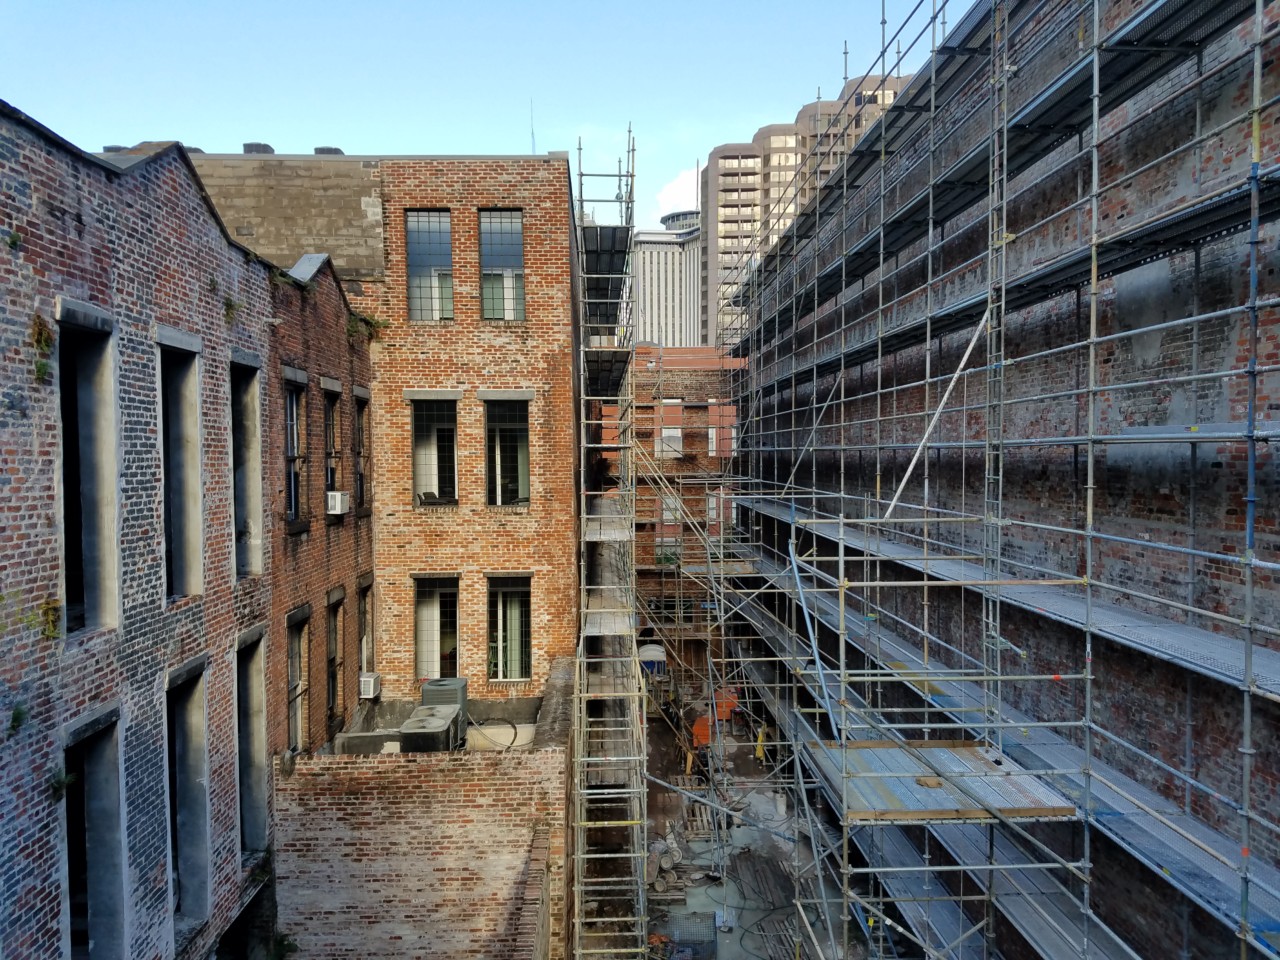 View of the construction site highlighting narrowness